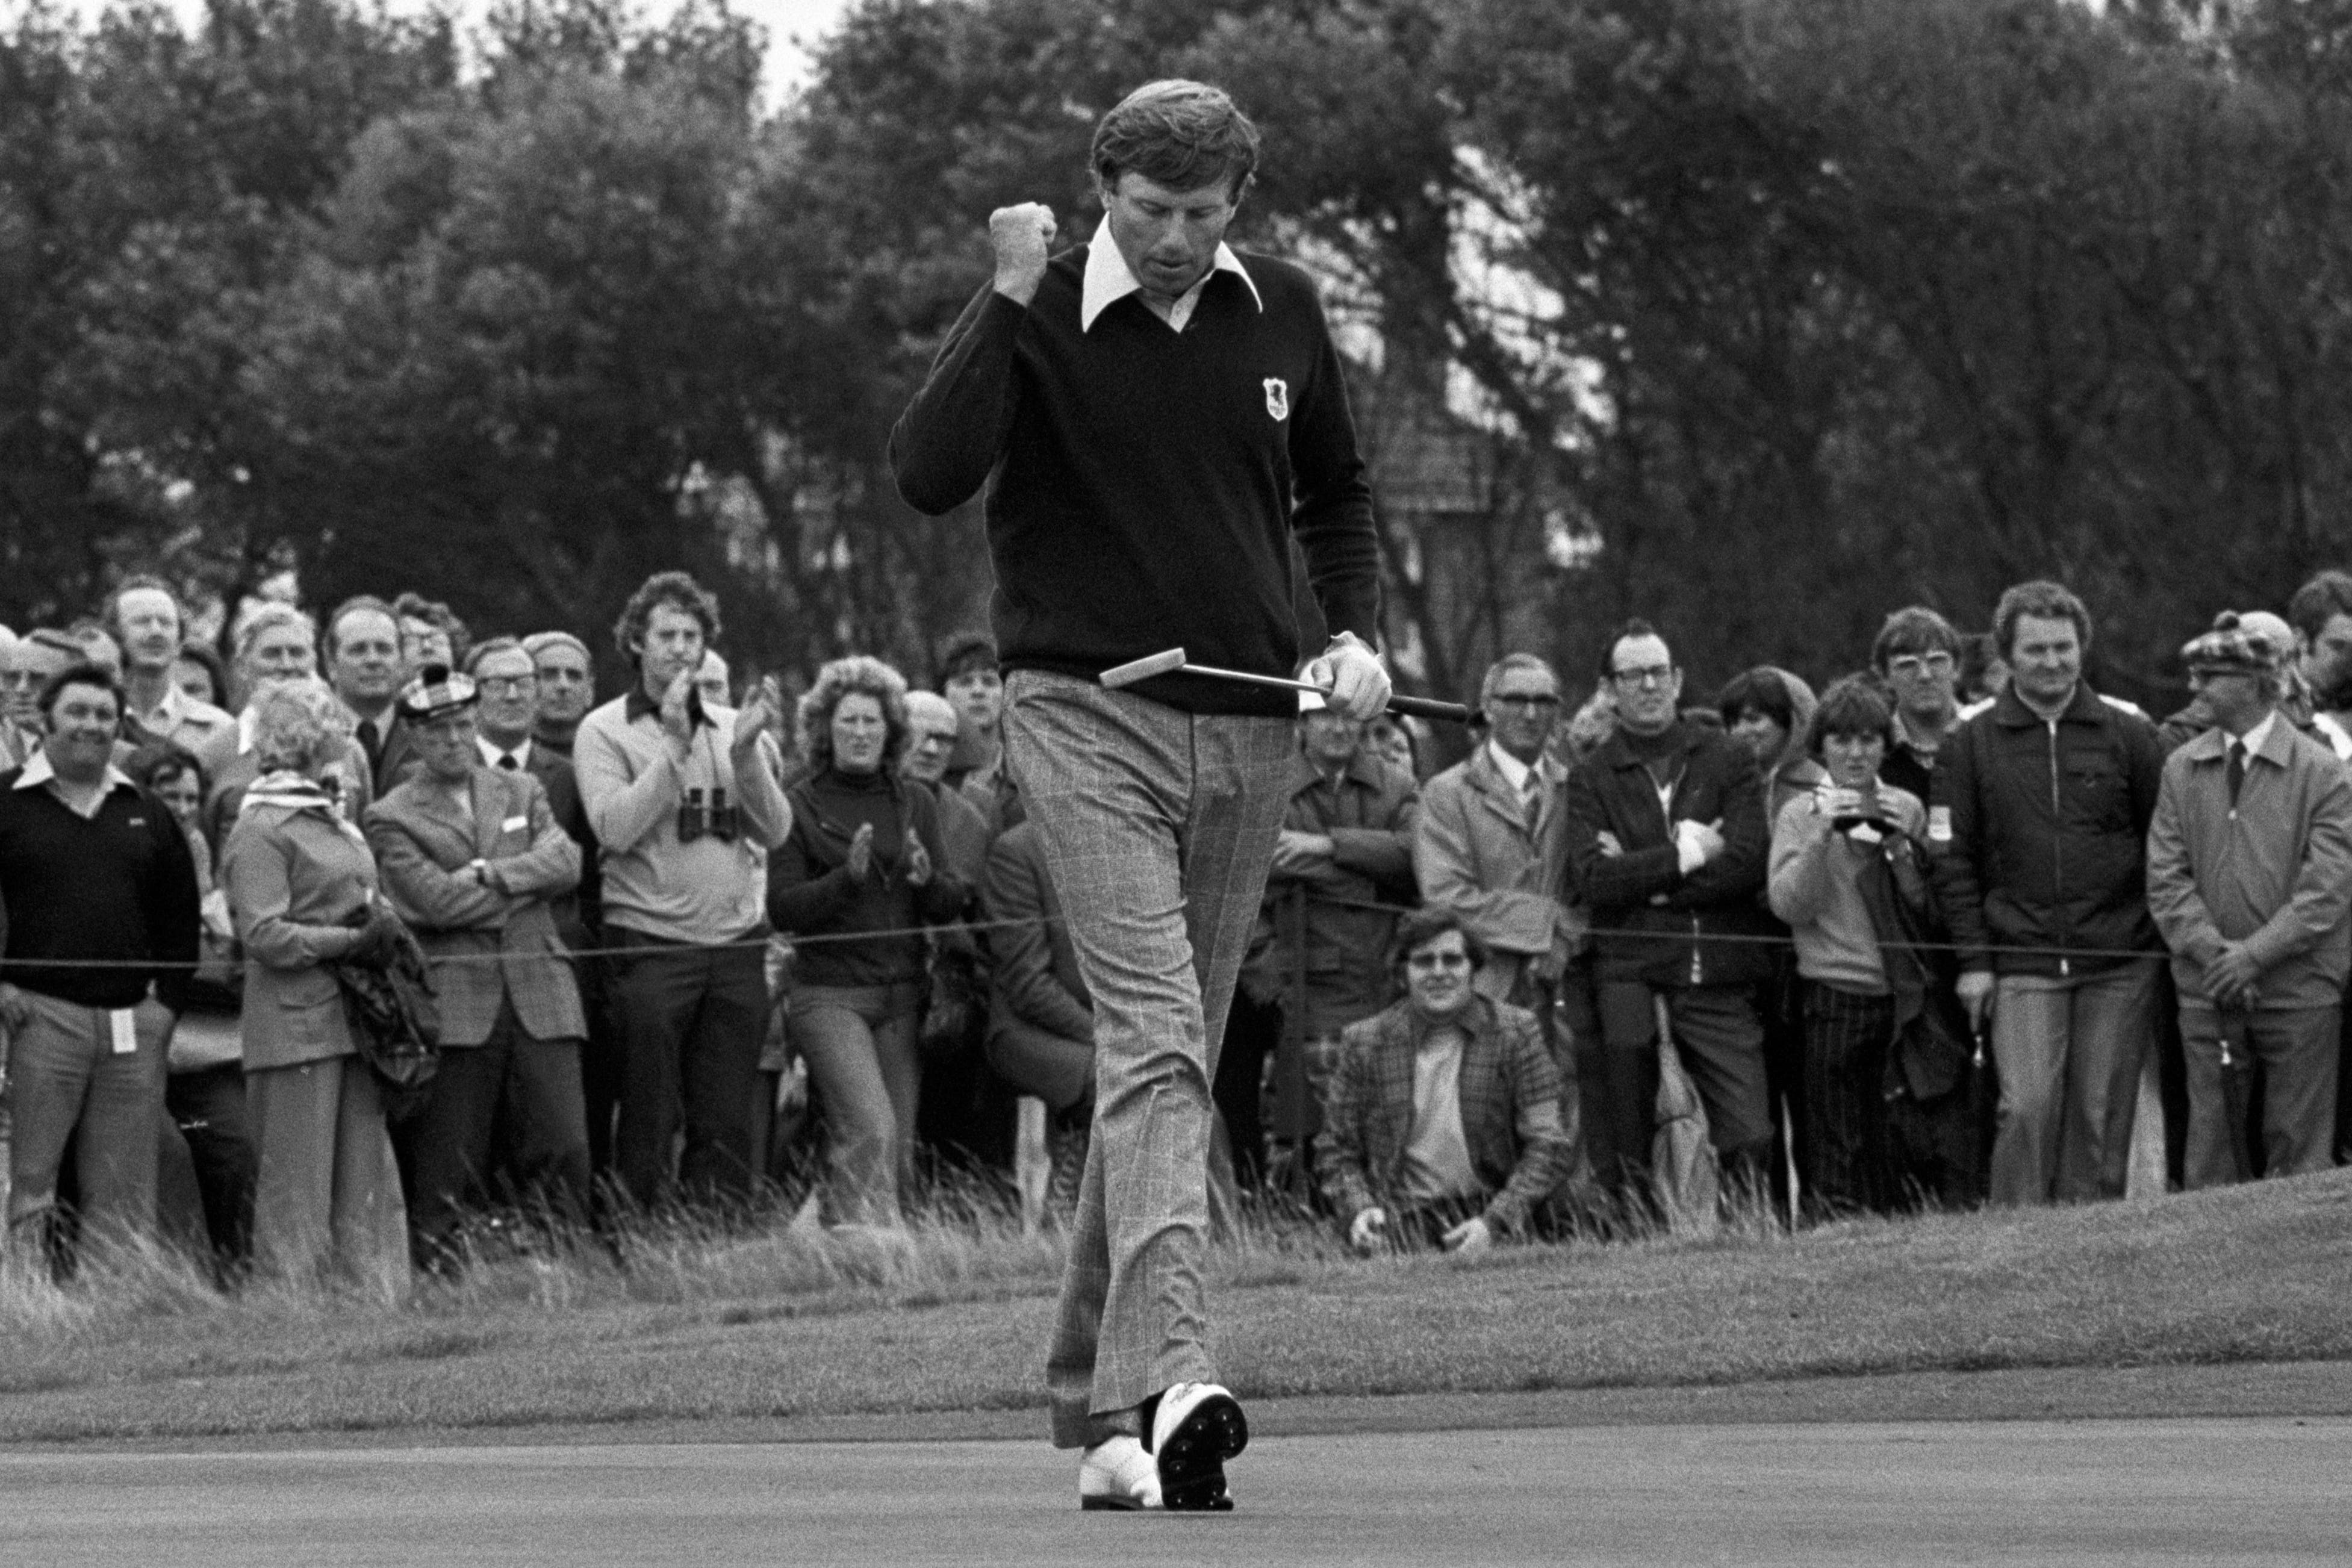 Peter Oosterhuis made six consecutive appearances in the Ryder Cup